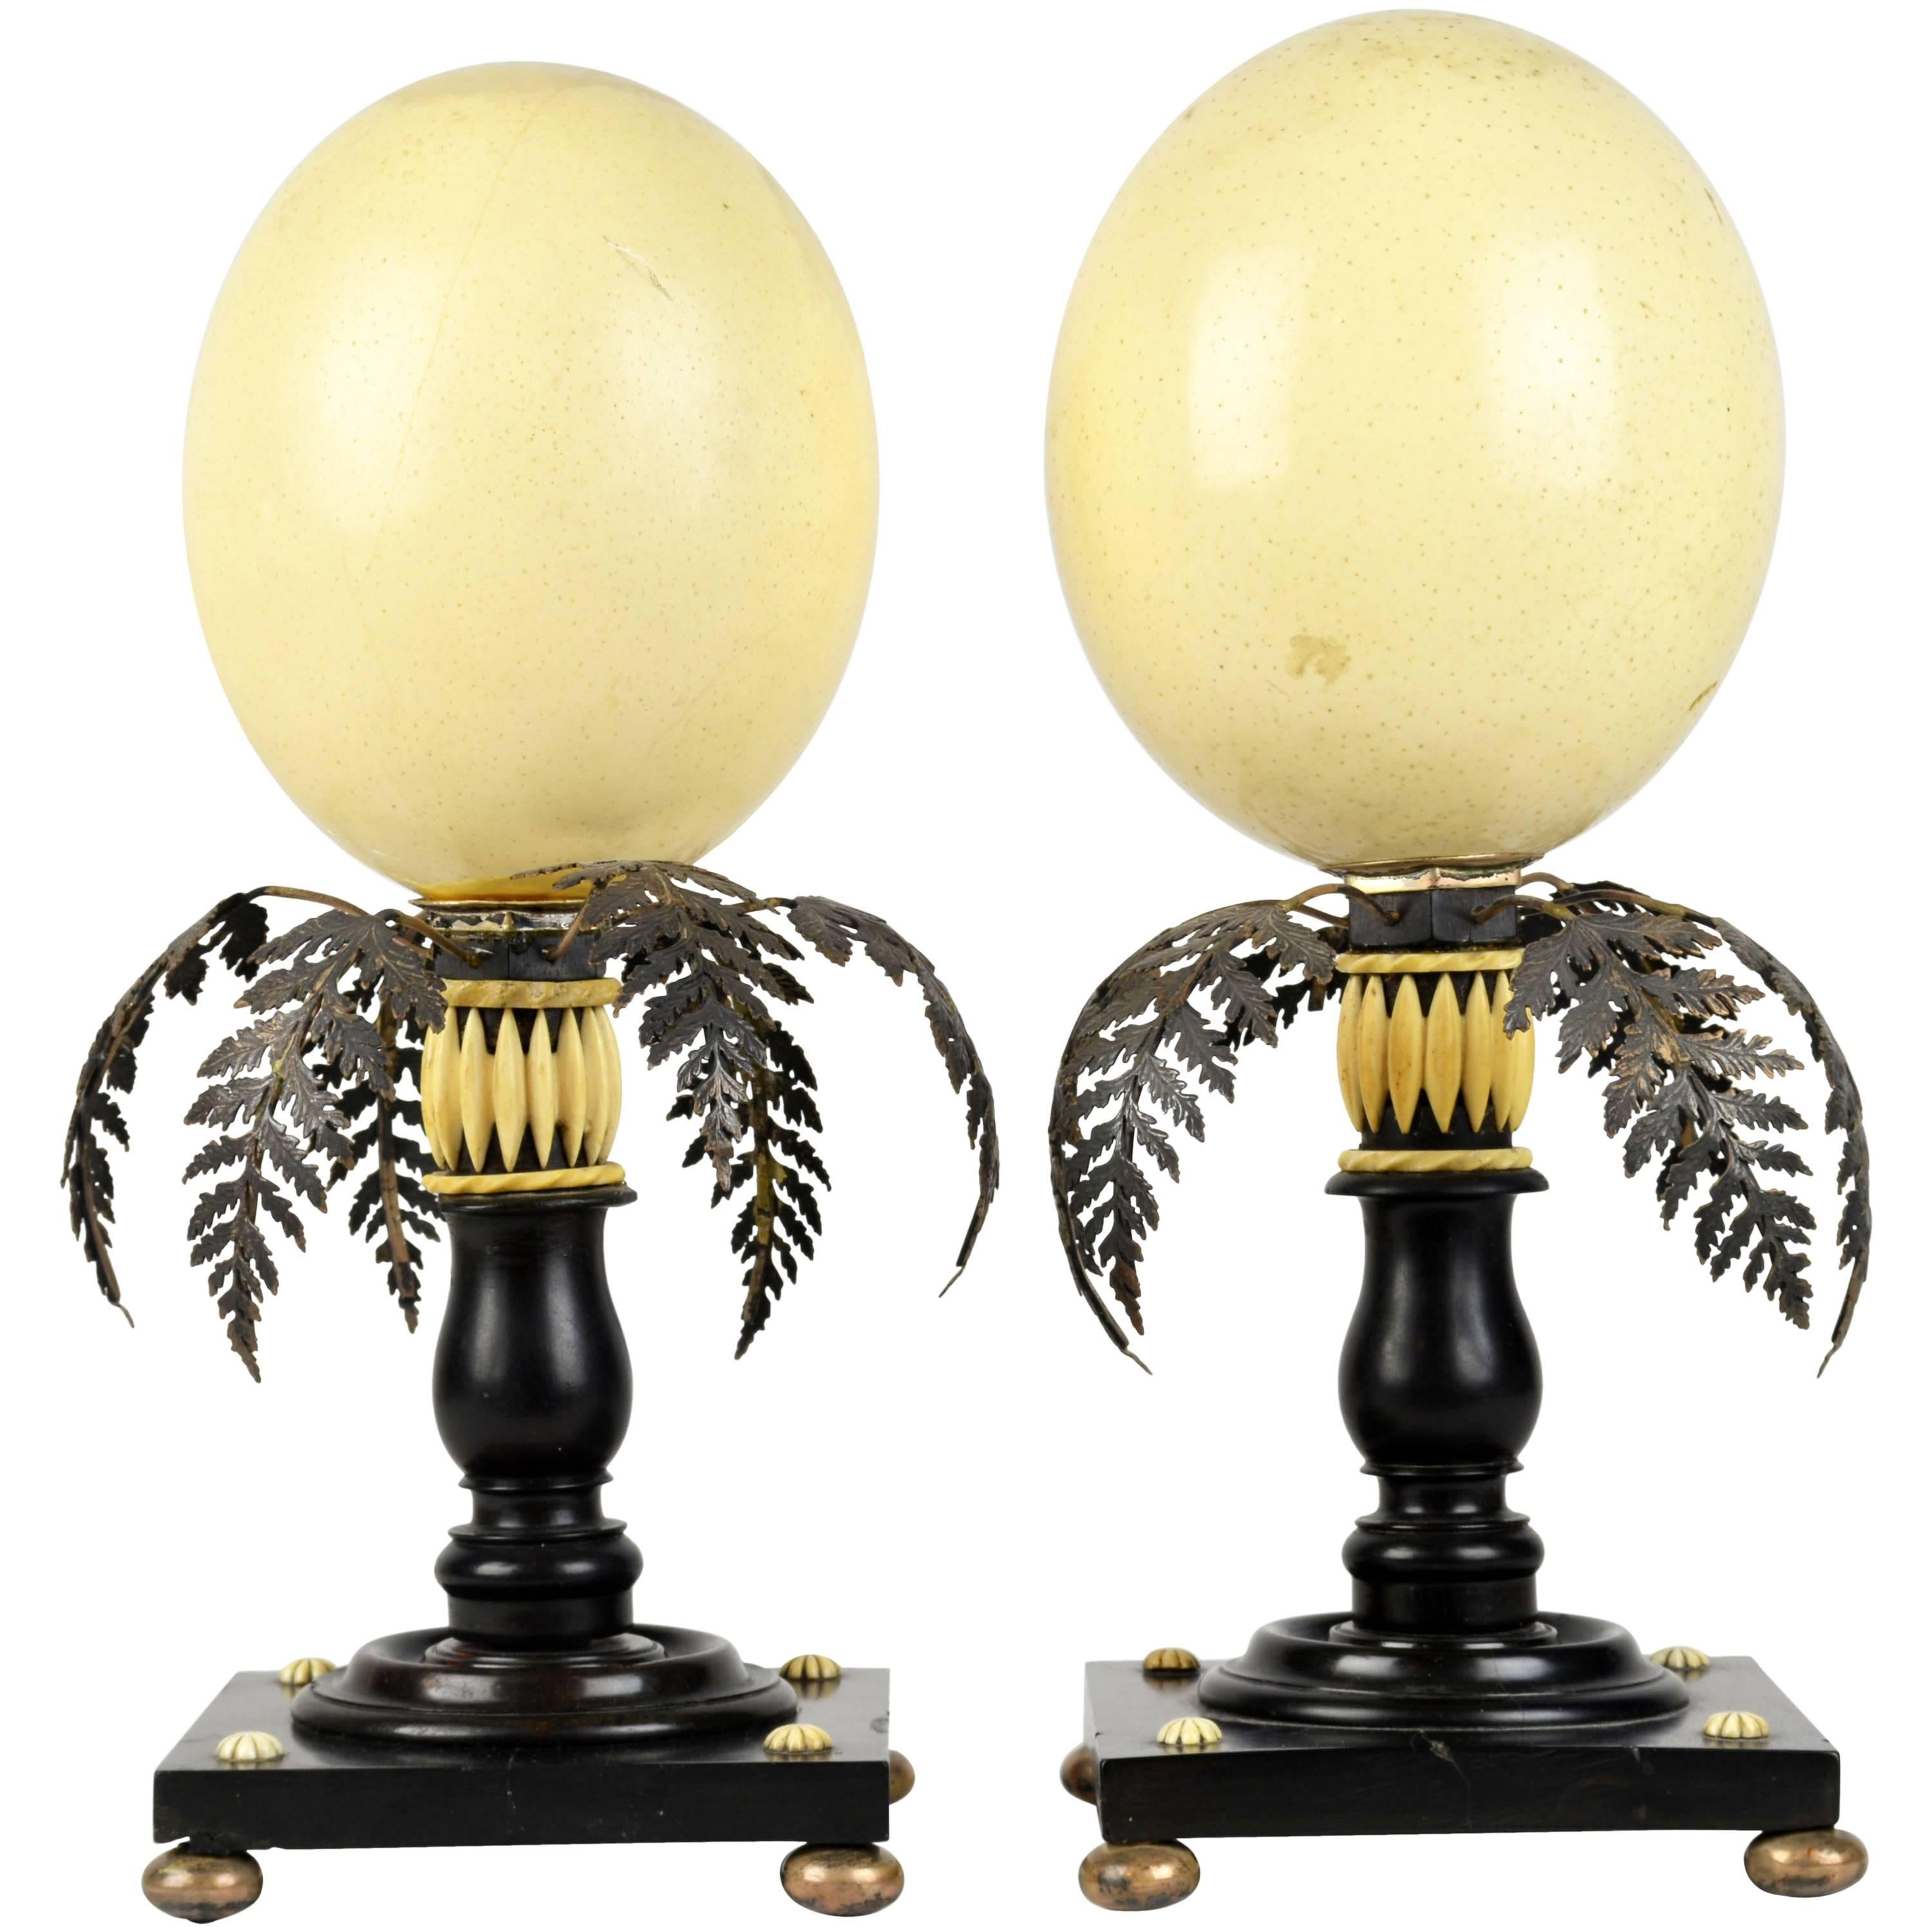 Austrian 19th Century Ostrich Eggs on Ivory Adorned Black Palm Tree Stands, Pair